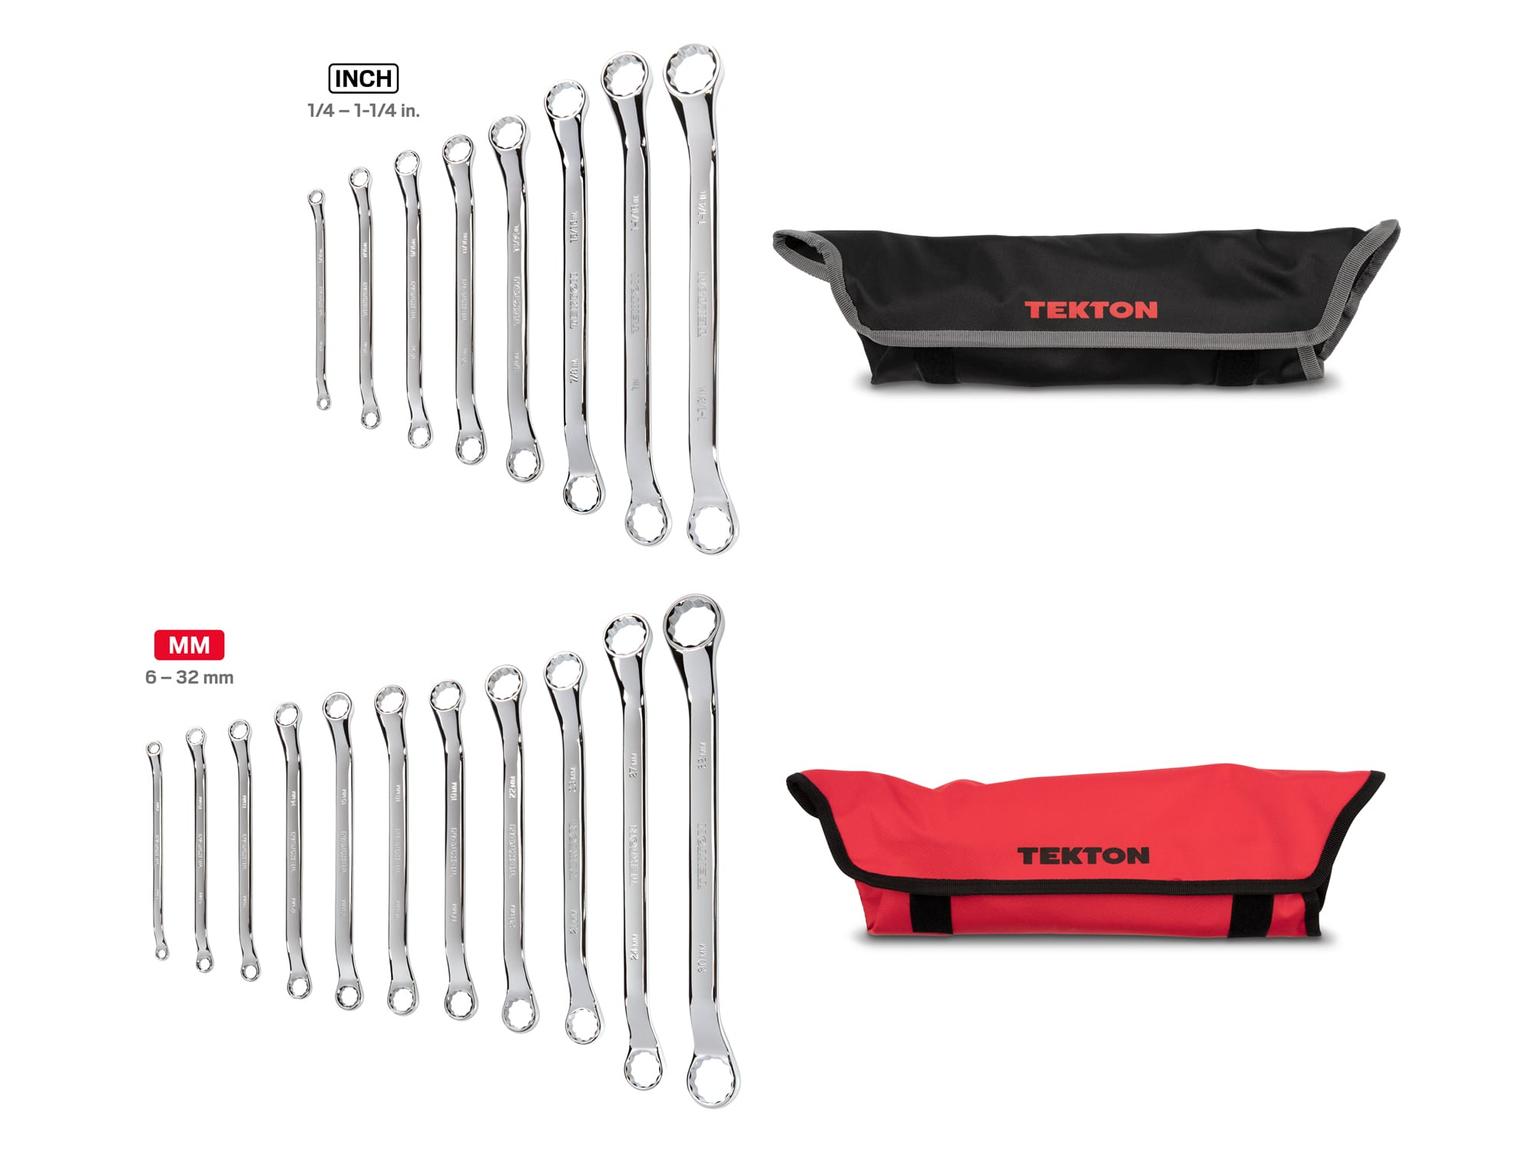 TEKTON WBE94302-T 45-Degree Offset Box End Wrench Set with Pouch, 19-Piece (1/4-1-1/4 in., 6-32 mm)